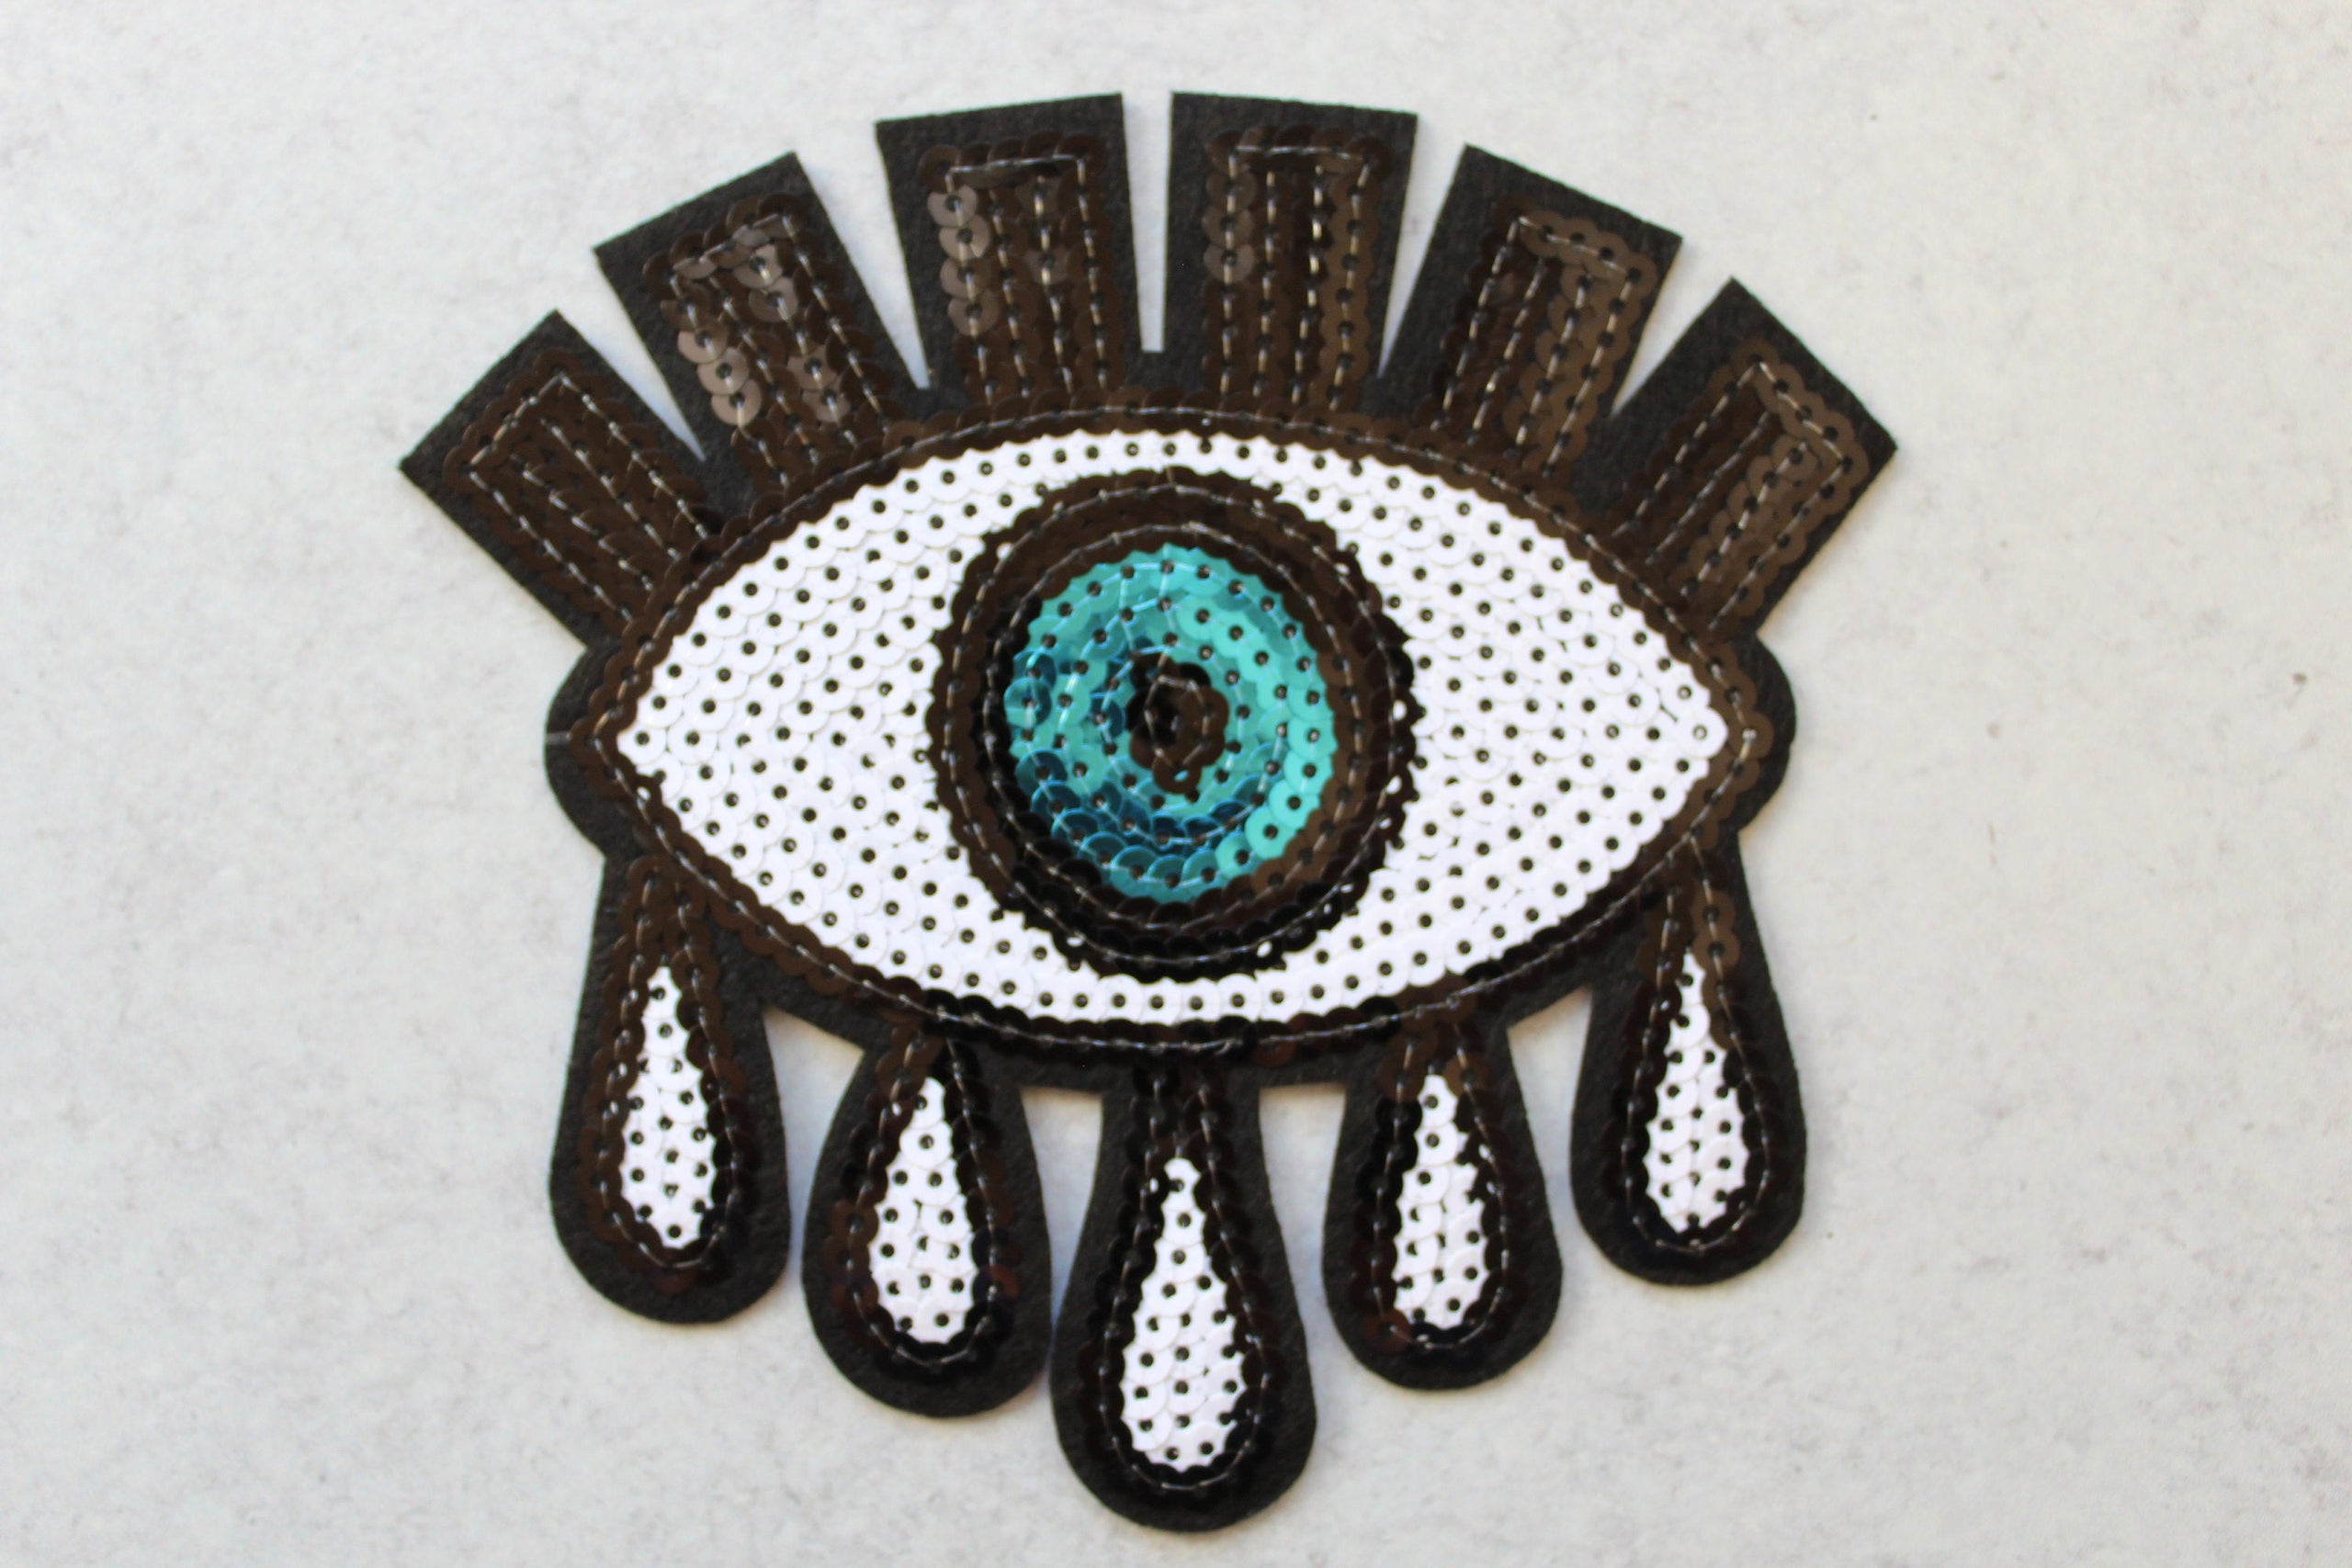 Wholesale Evil Eye Patch Sequined Embroidered Iron On Patch Sewing